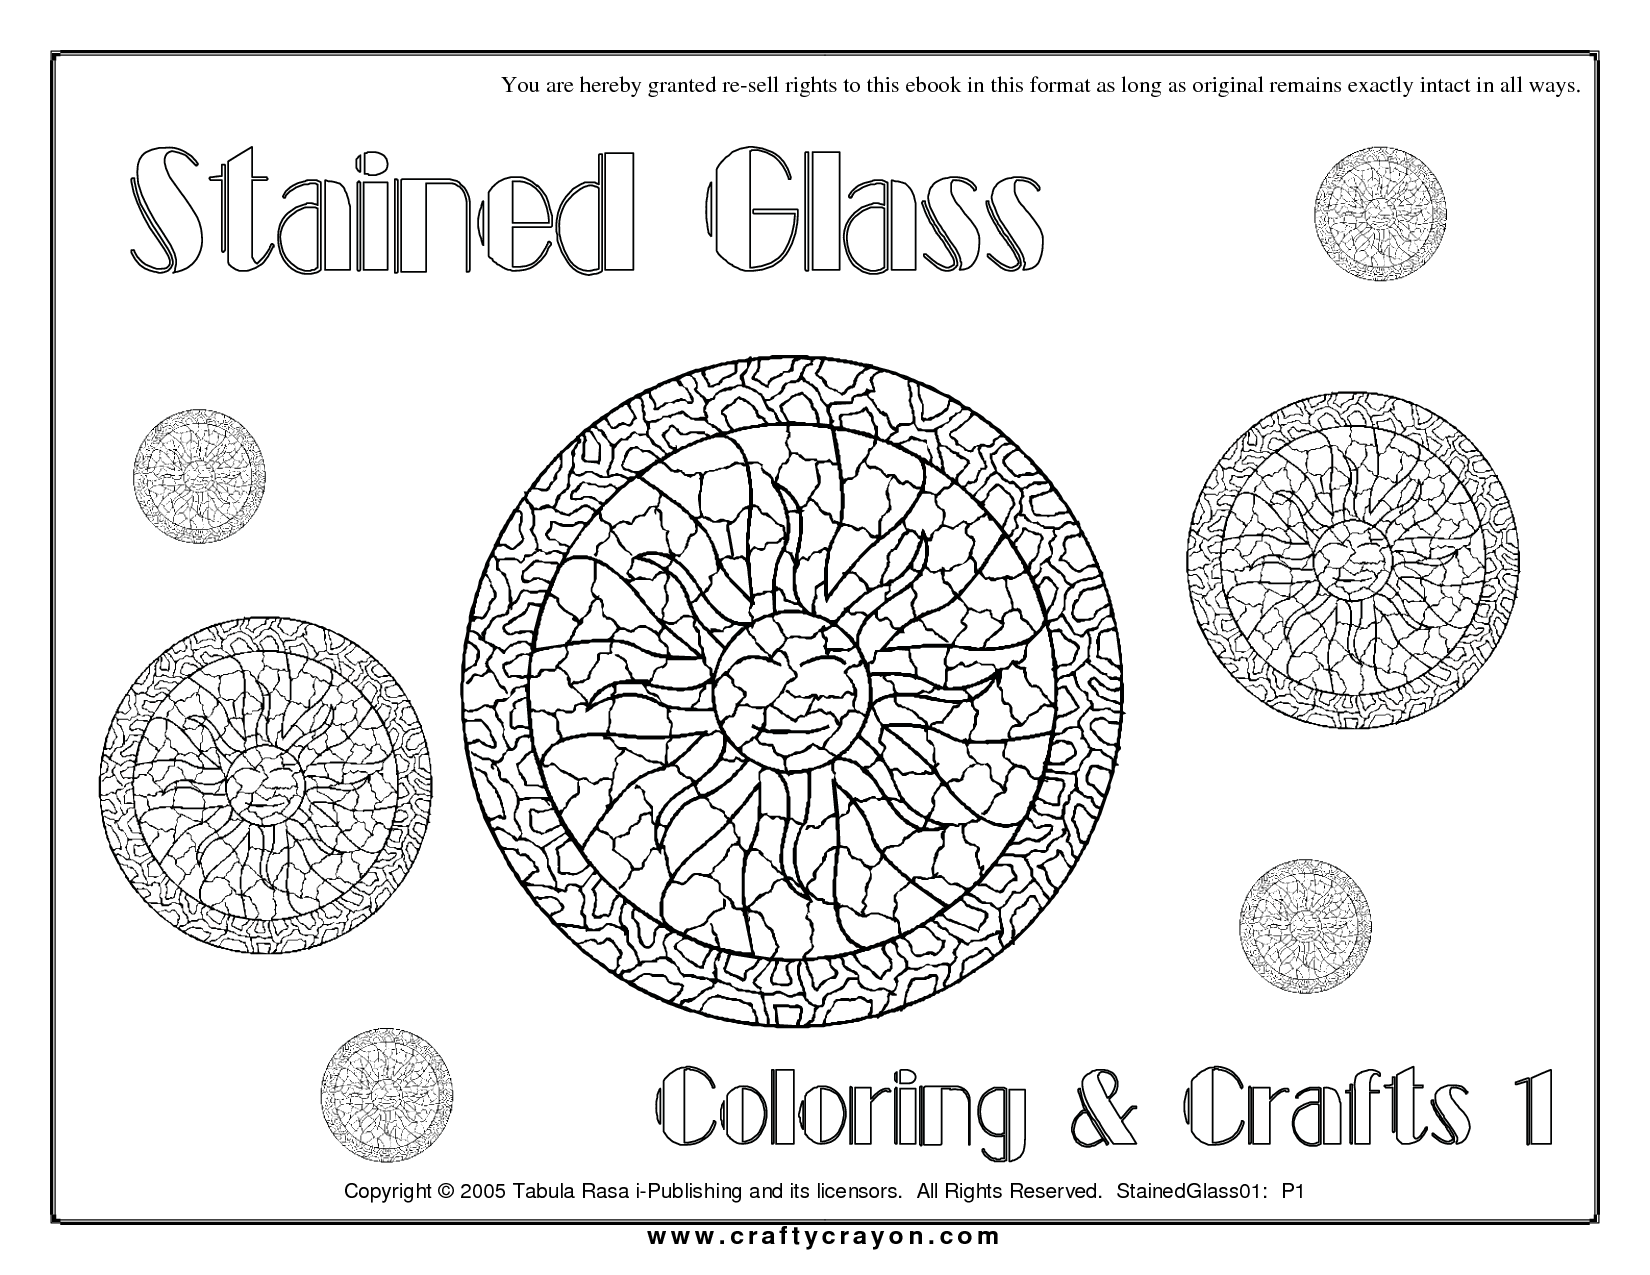 STAINED GLASS BELL DESIGN COLORING PAGES - GLAS DESIGN